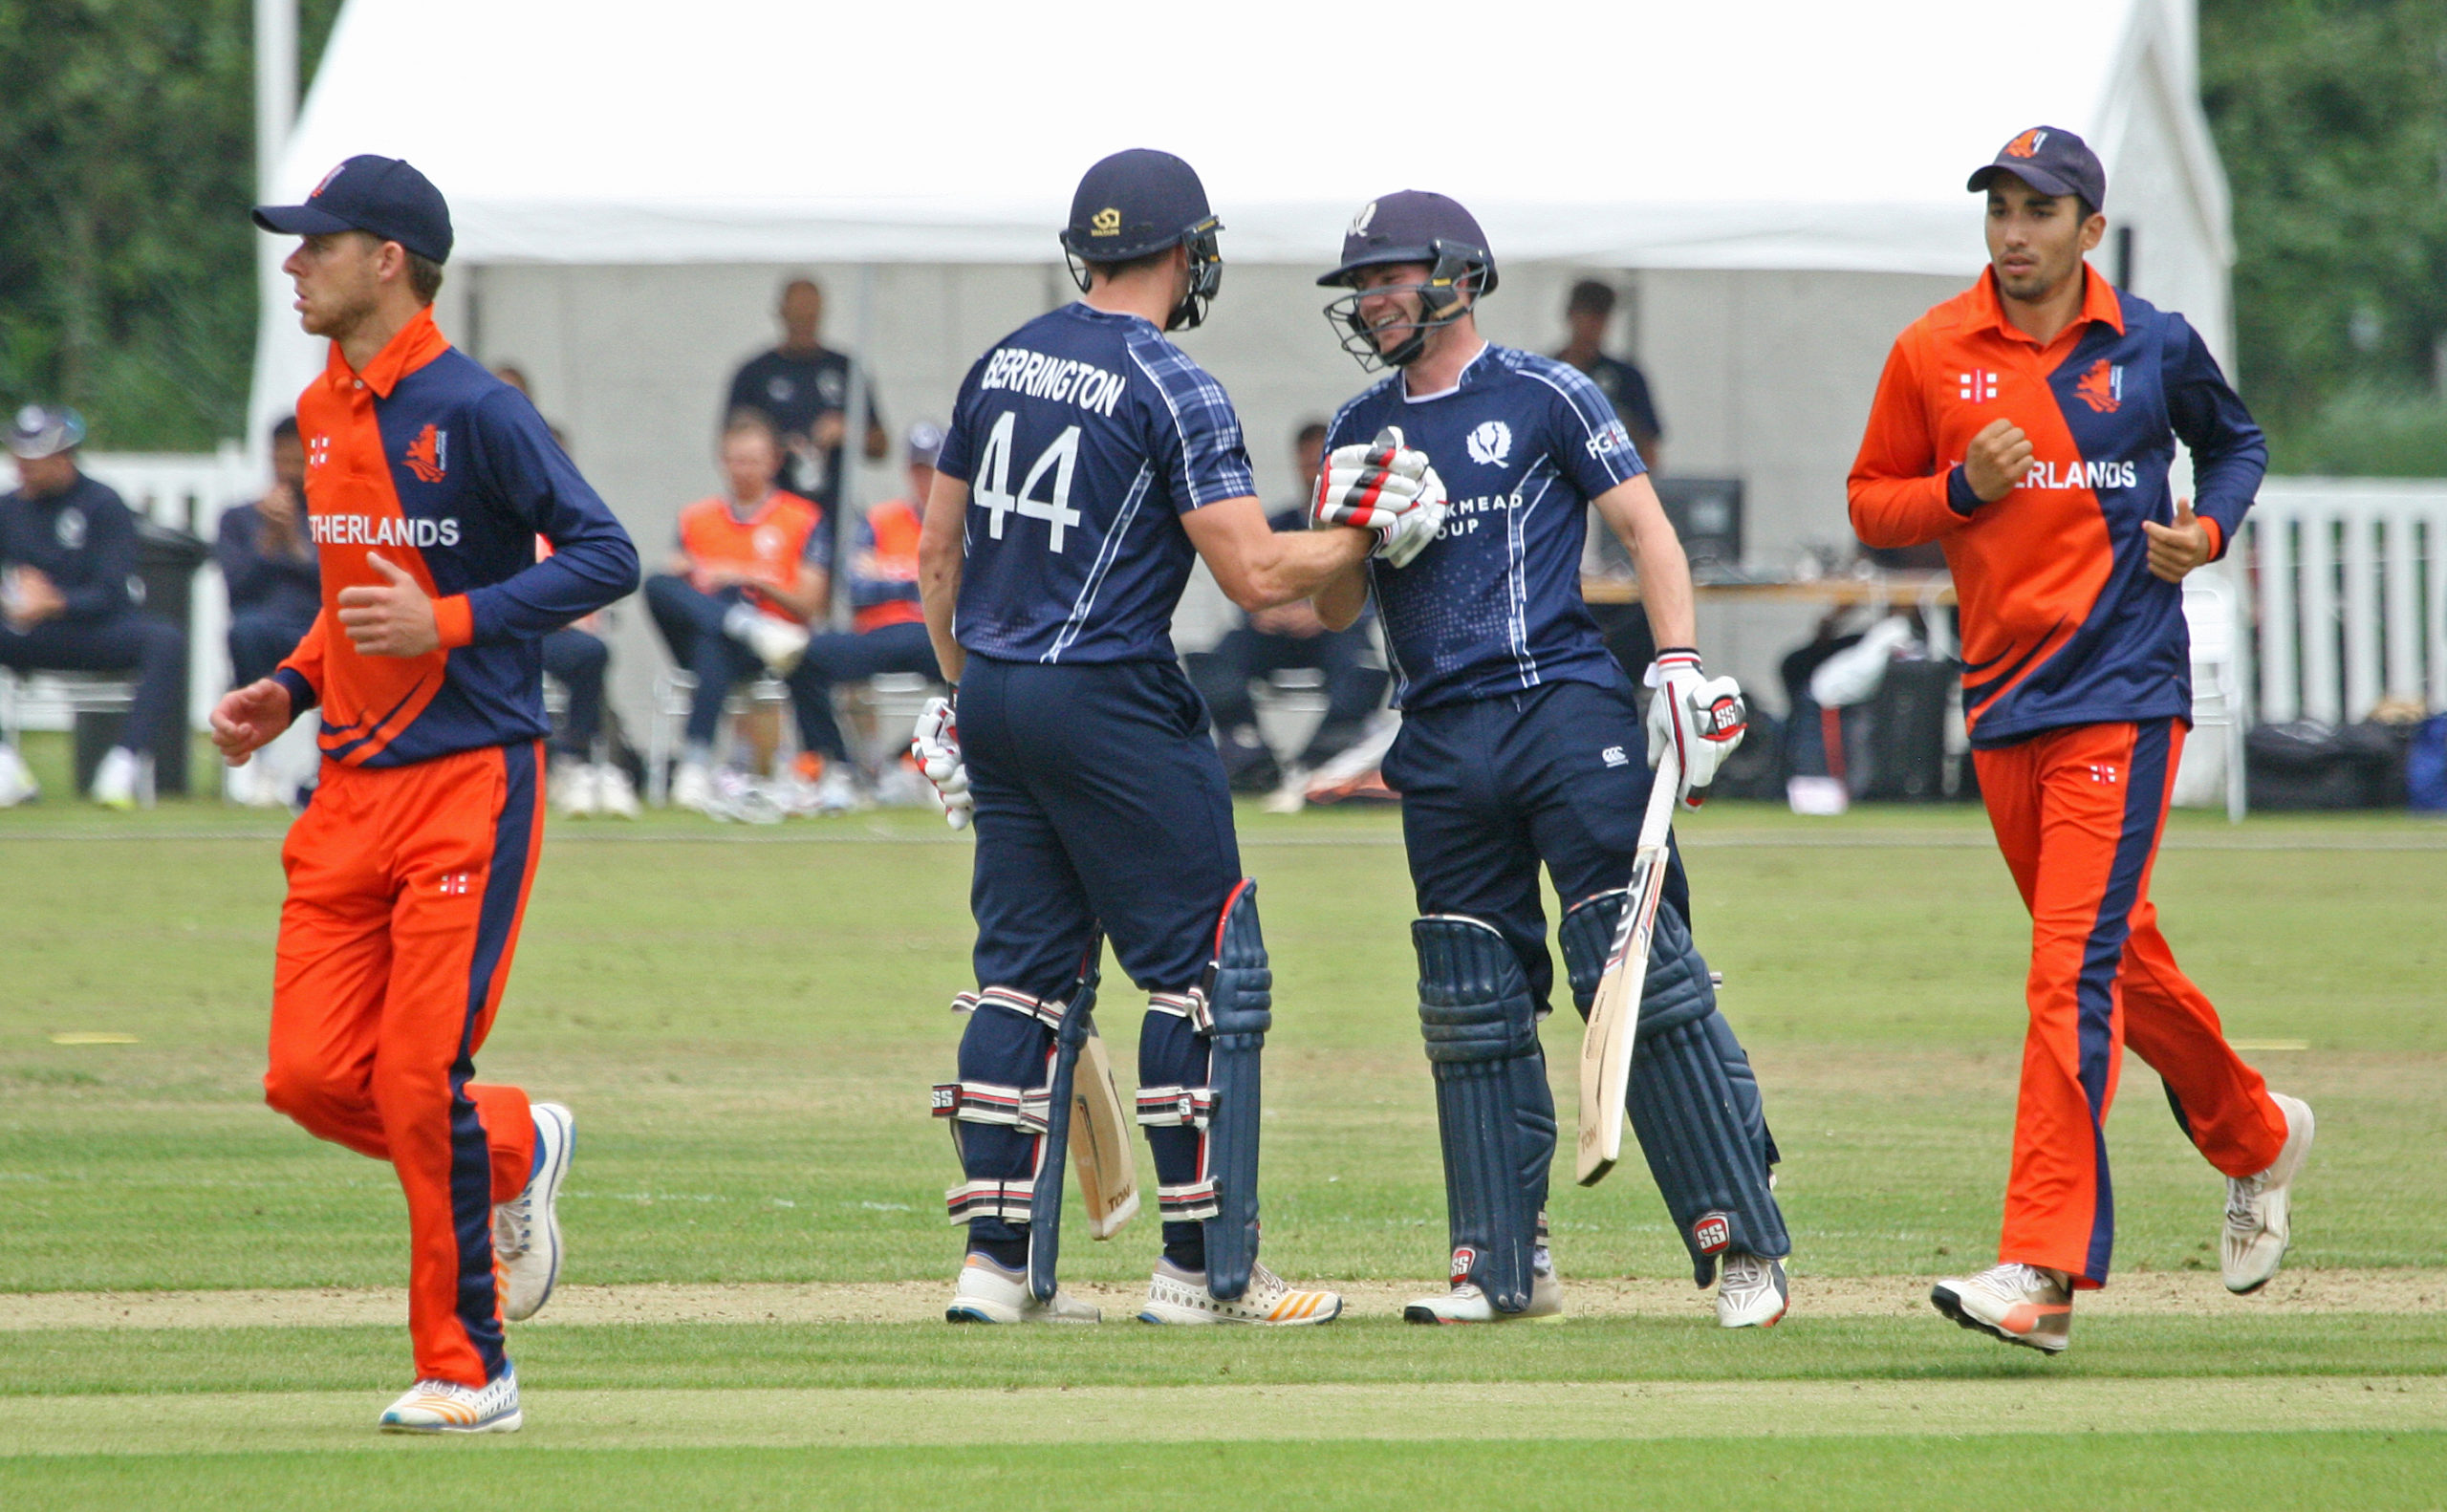 519-day wait for international cricket comes to an end as Scotland men face Netherlands